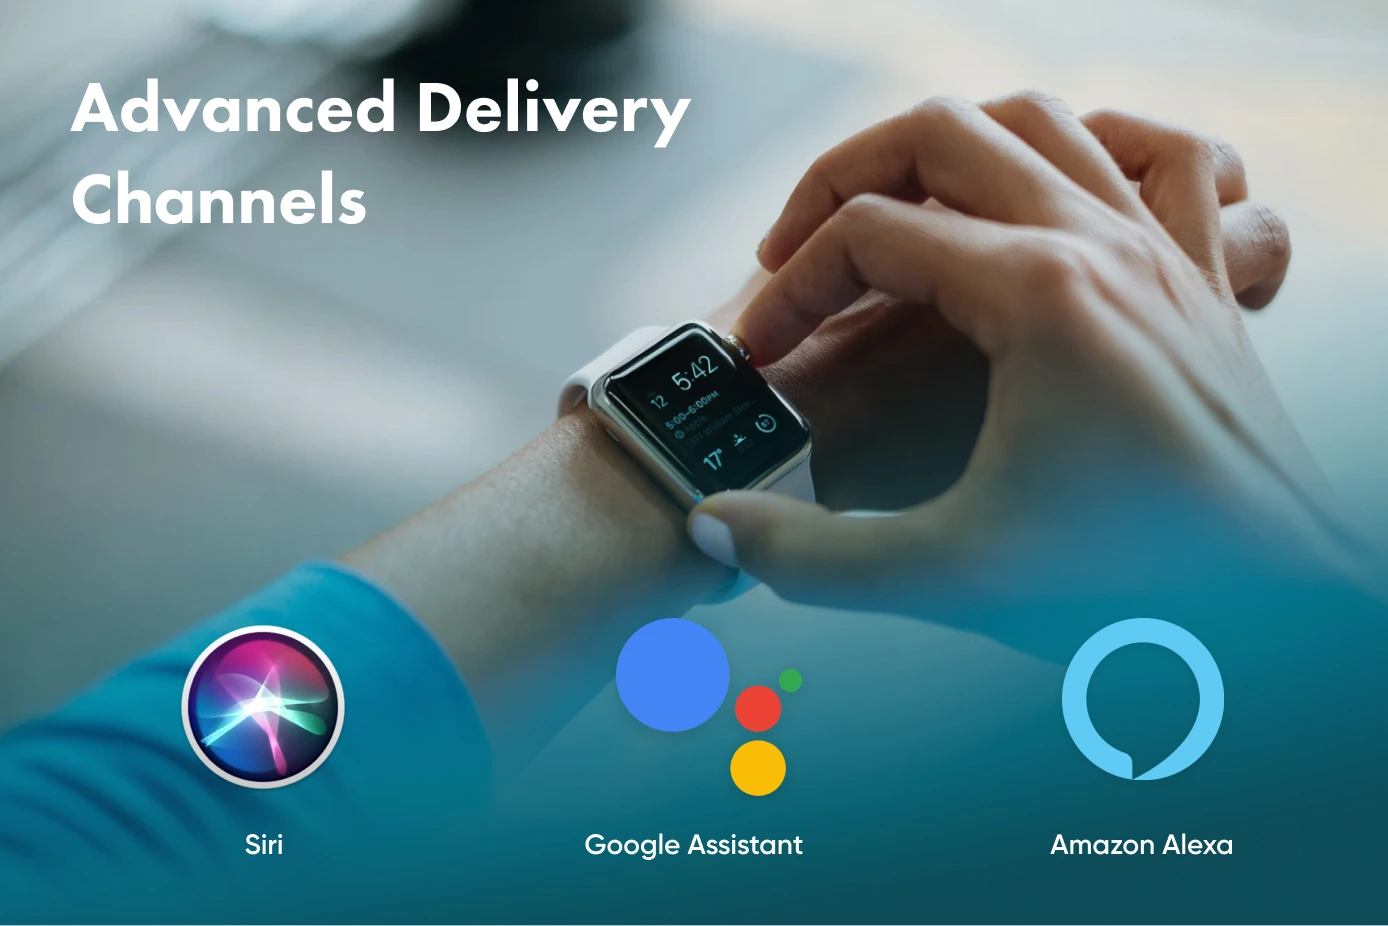 There are many advantages such as advanced Delivery channels. Explore what other advantages there are.